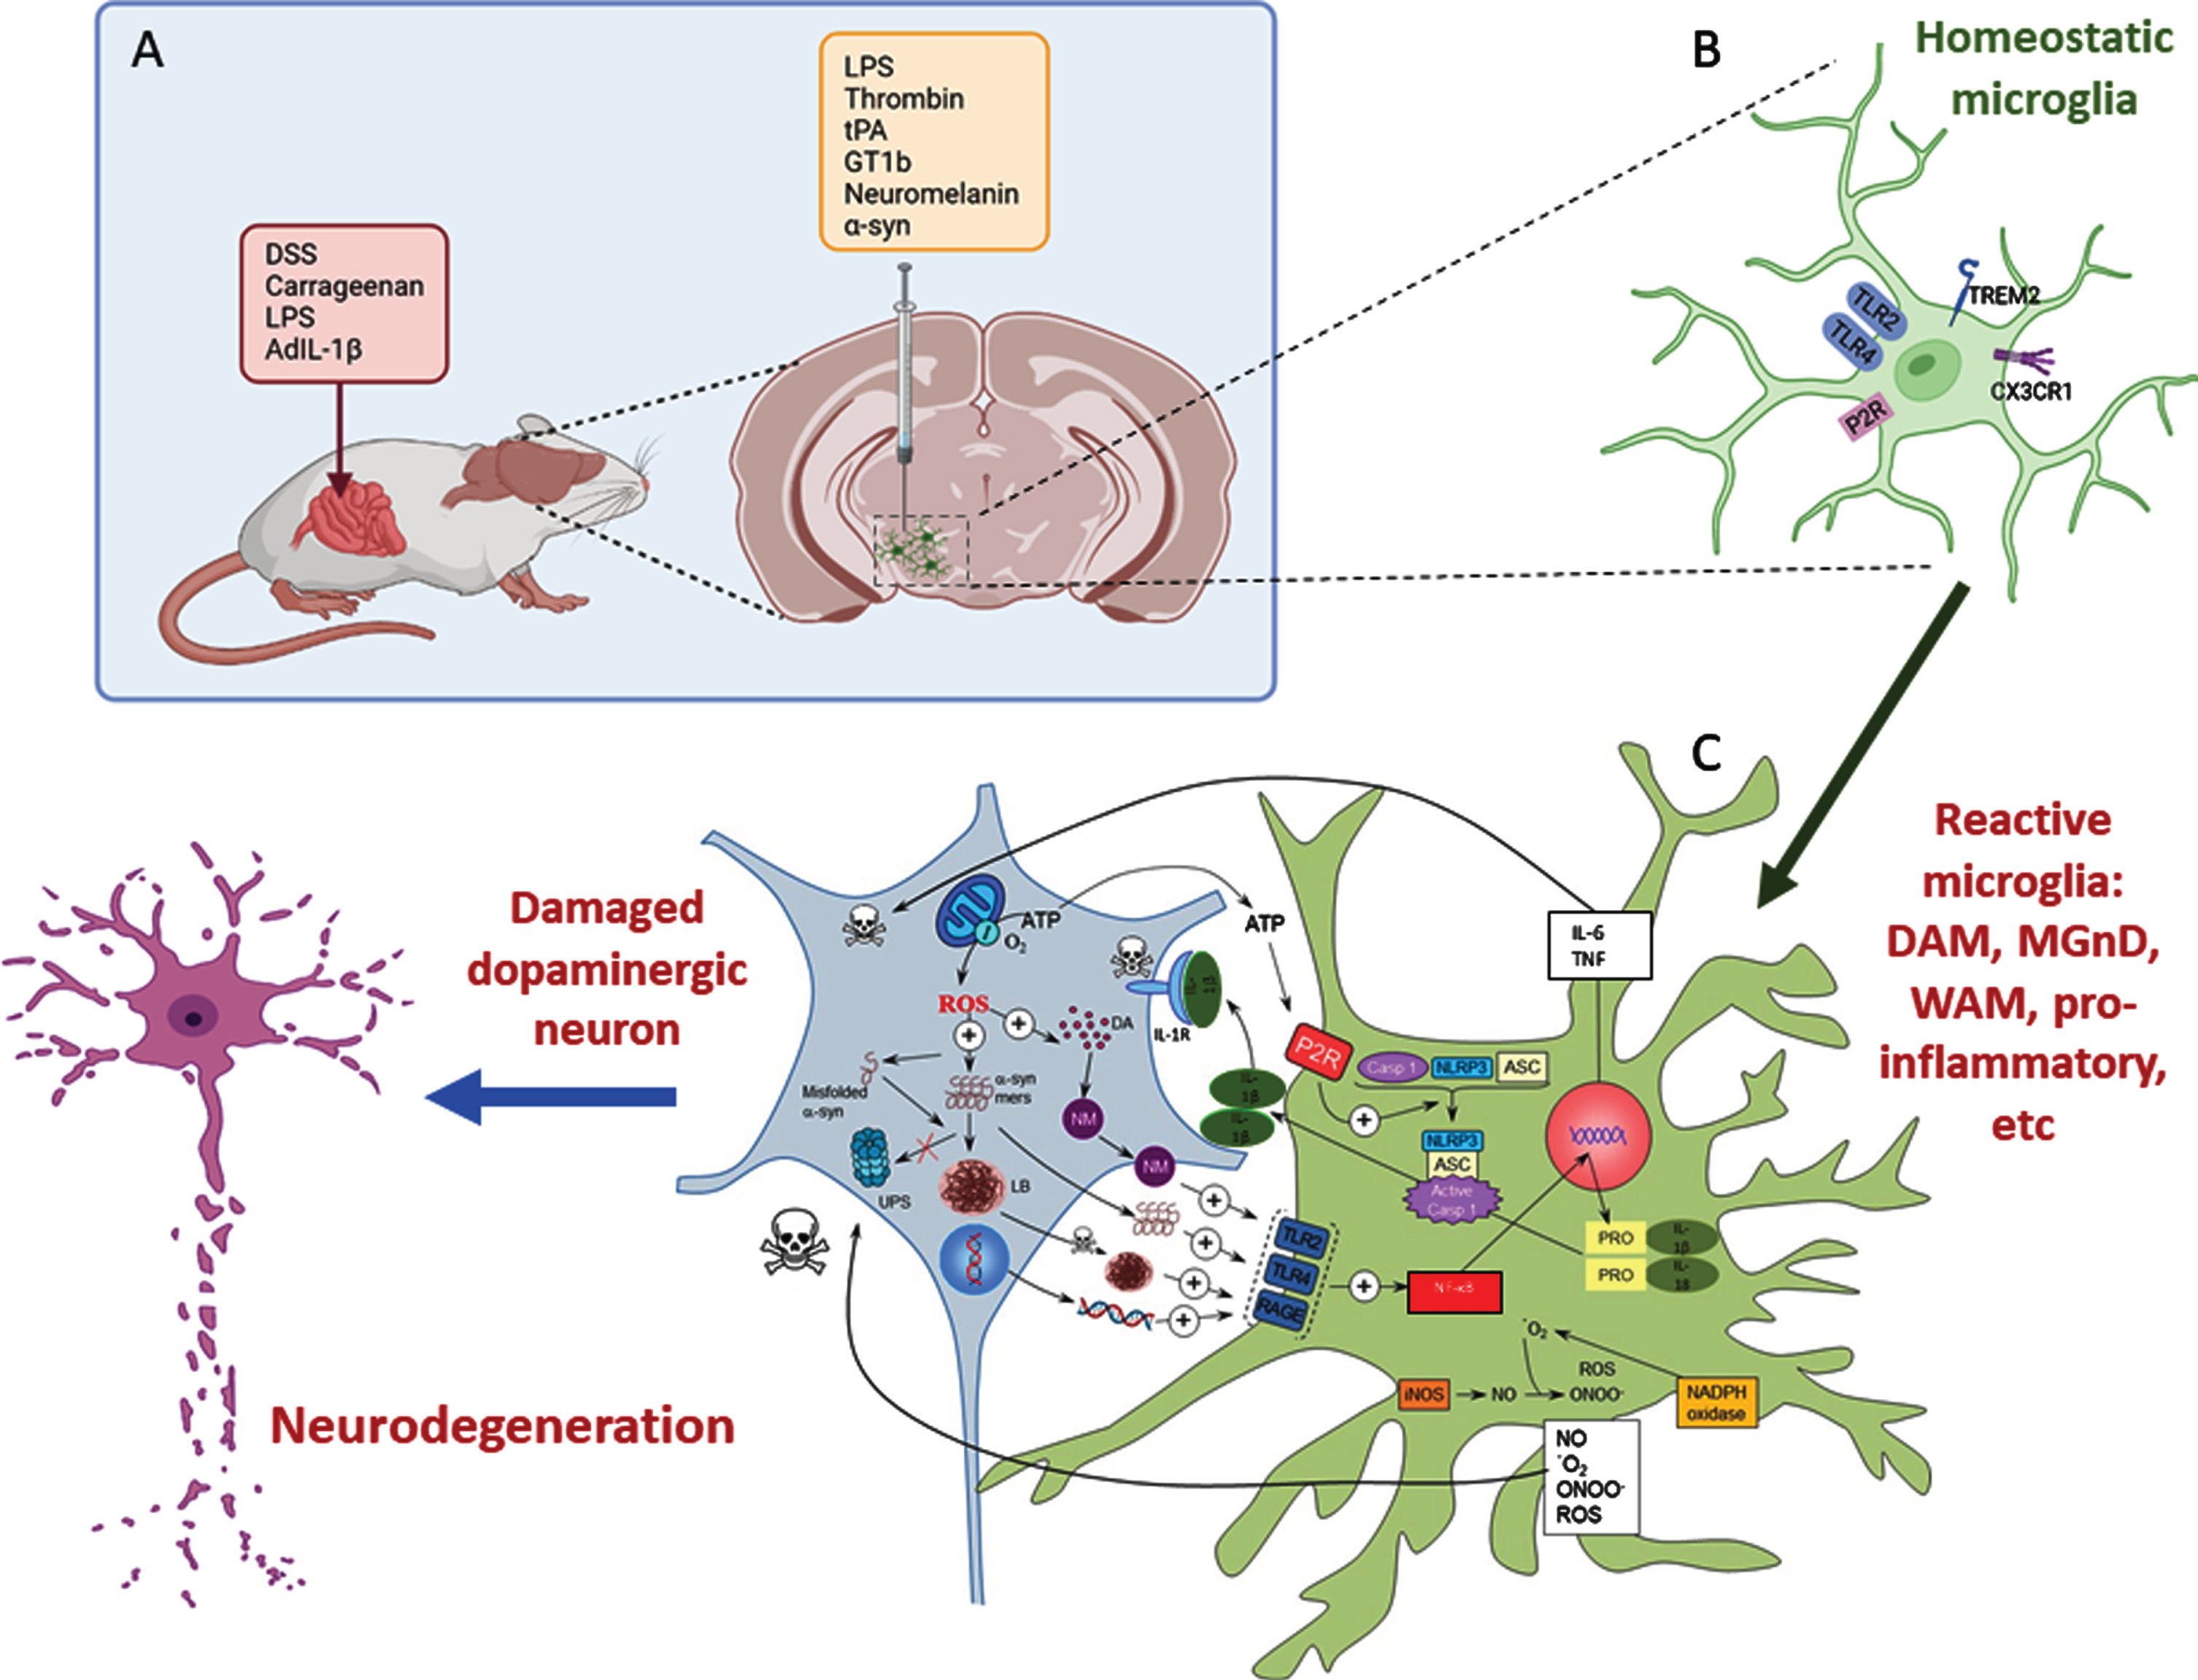 A) Inflammatory models of Parkinson’s disease take advantage of the use of different proinflammatory compounds administered peripherally, intracerebral, or by combining both pathways. B) Whatever compound and route of administration used, homeostatic microglia sense the environment through a set of surface receptors (the pattern recognition receptors, PRRs), including TLR2, TLR4, and RAGE. C) When activated, microglia undergo molecular and morphological changes, becoming reactive microglia. Illustrative examples are the DAM phenotype driven by TREM2 or the proinflammatory phenotype driven by TLR activation. Different microglia phenotypes can coexist under neurodegenerative conditions. Their activation leads to activation of the NF-κB pathway and the transcription of several proinflammatory genes (TNF and IL-6). Assembly of the NLRP3 inflammasome and activation of caspase-1 produce IL-1β and IL-18. Reactive microglia are also a source of ROS and RNS. All these products exert a harmful effect on dopaminergic neurons, which in turn release substances such as ATP, neuromelanin, and different forms of α-syn (either monomers or aggregates) that bind microglial PRRs in a vicious cycle that eventually leads to the death of dopaminergic neurons. Modified from Herrera et al., 2018 [169] using BioRender.